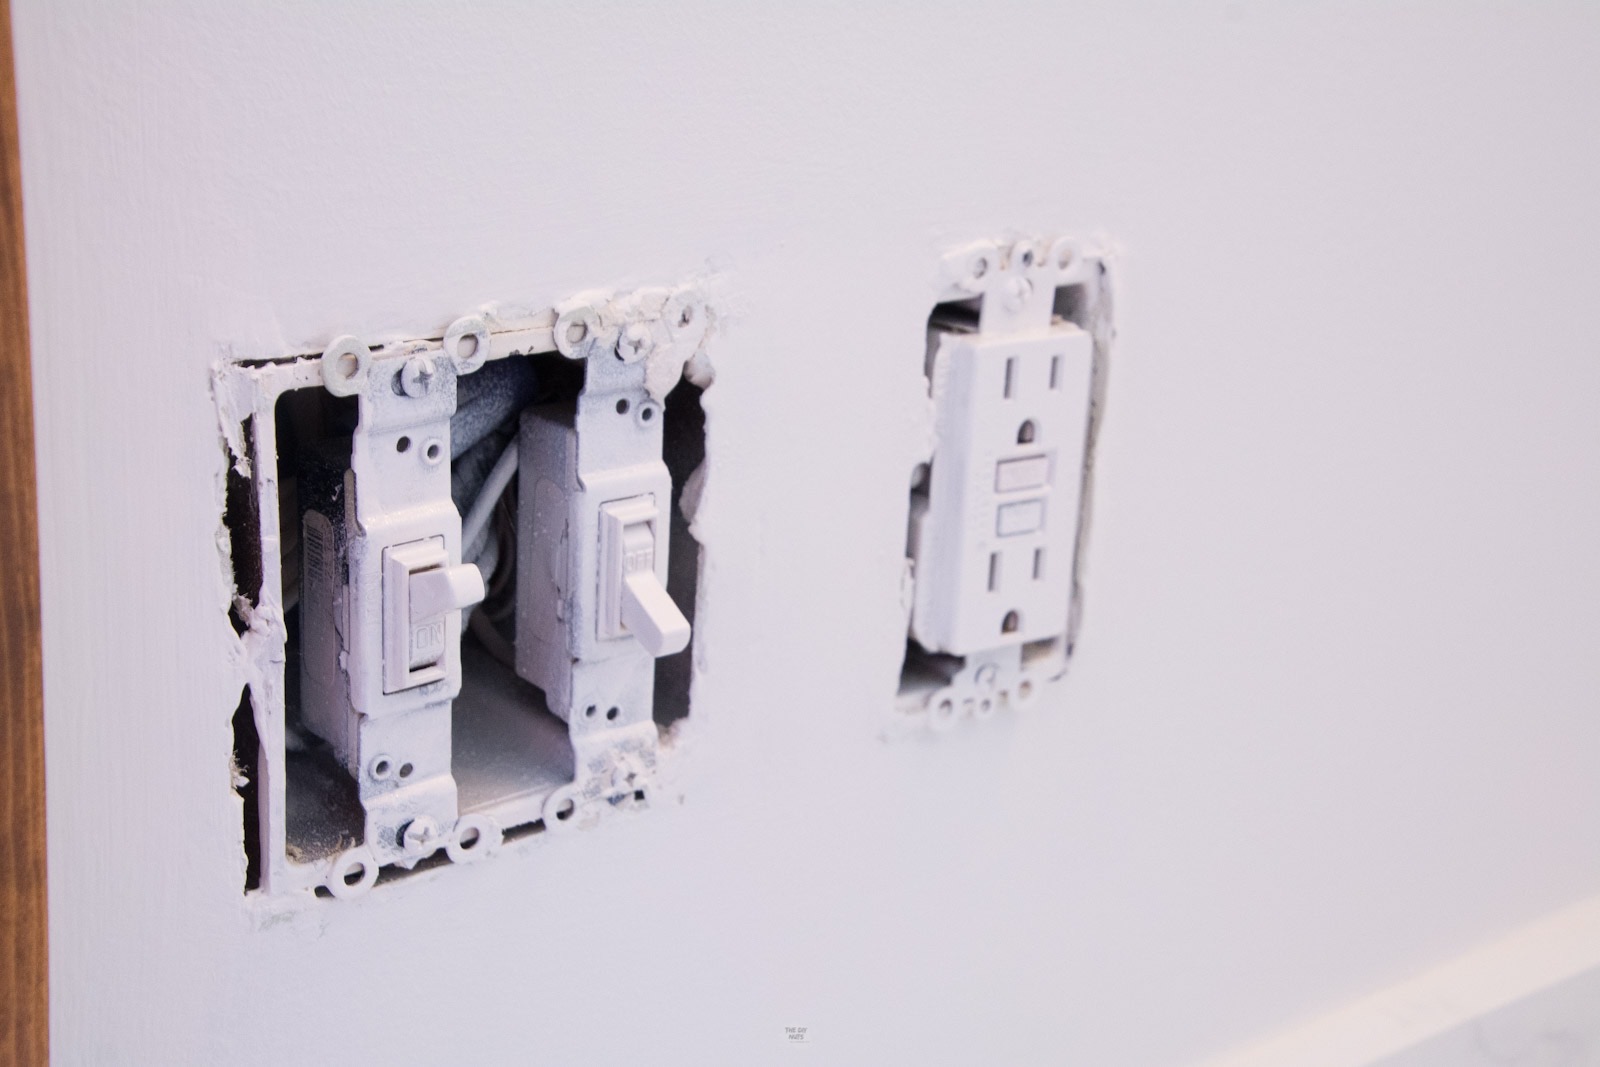 two light switches with outlets sprayed with white paint.